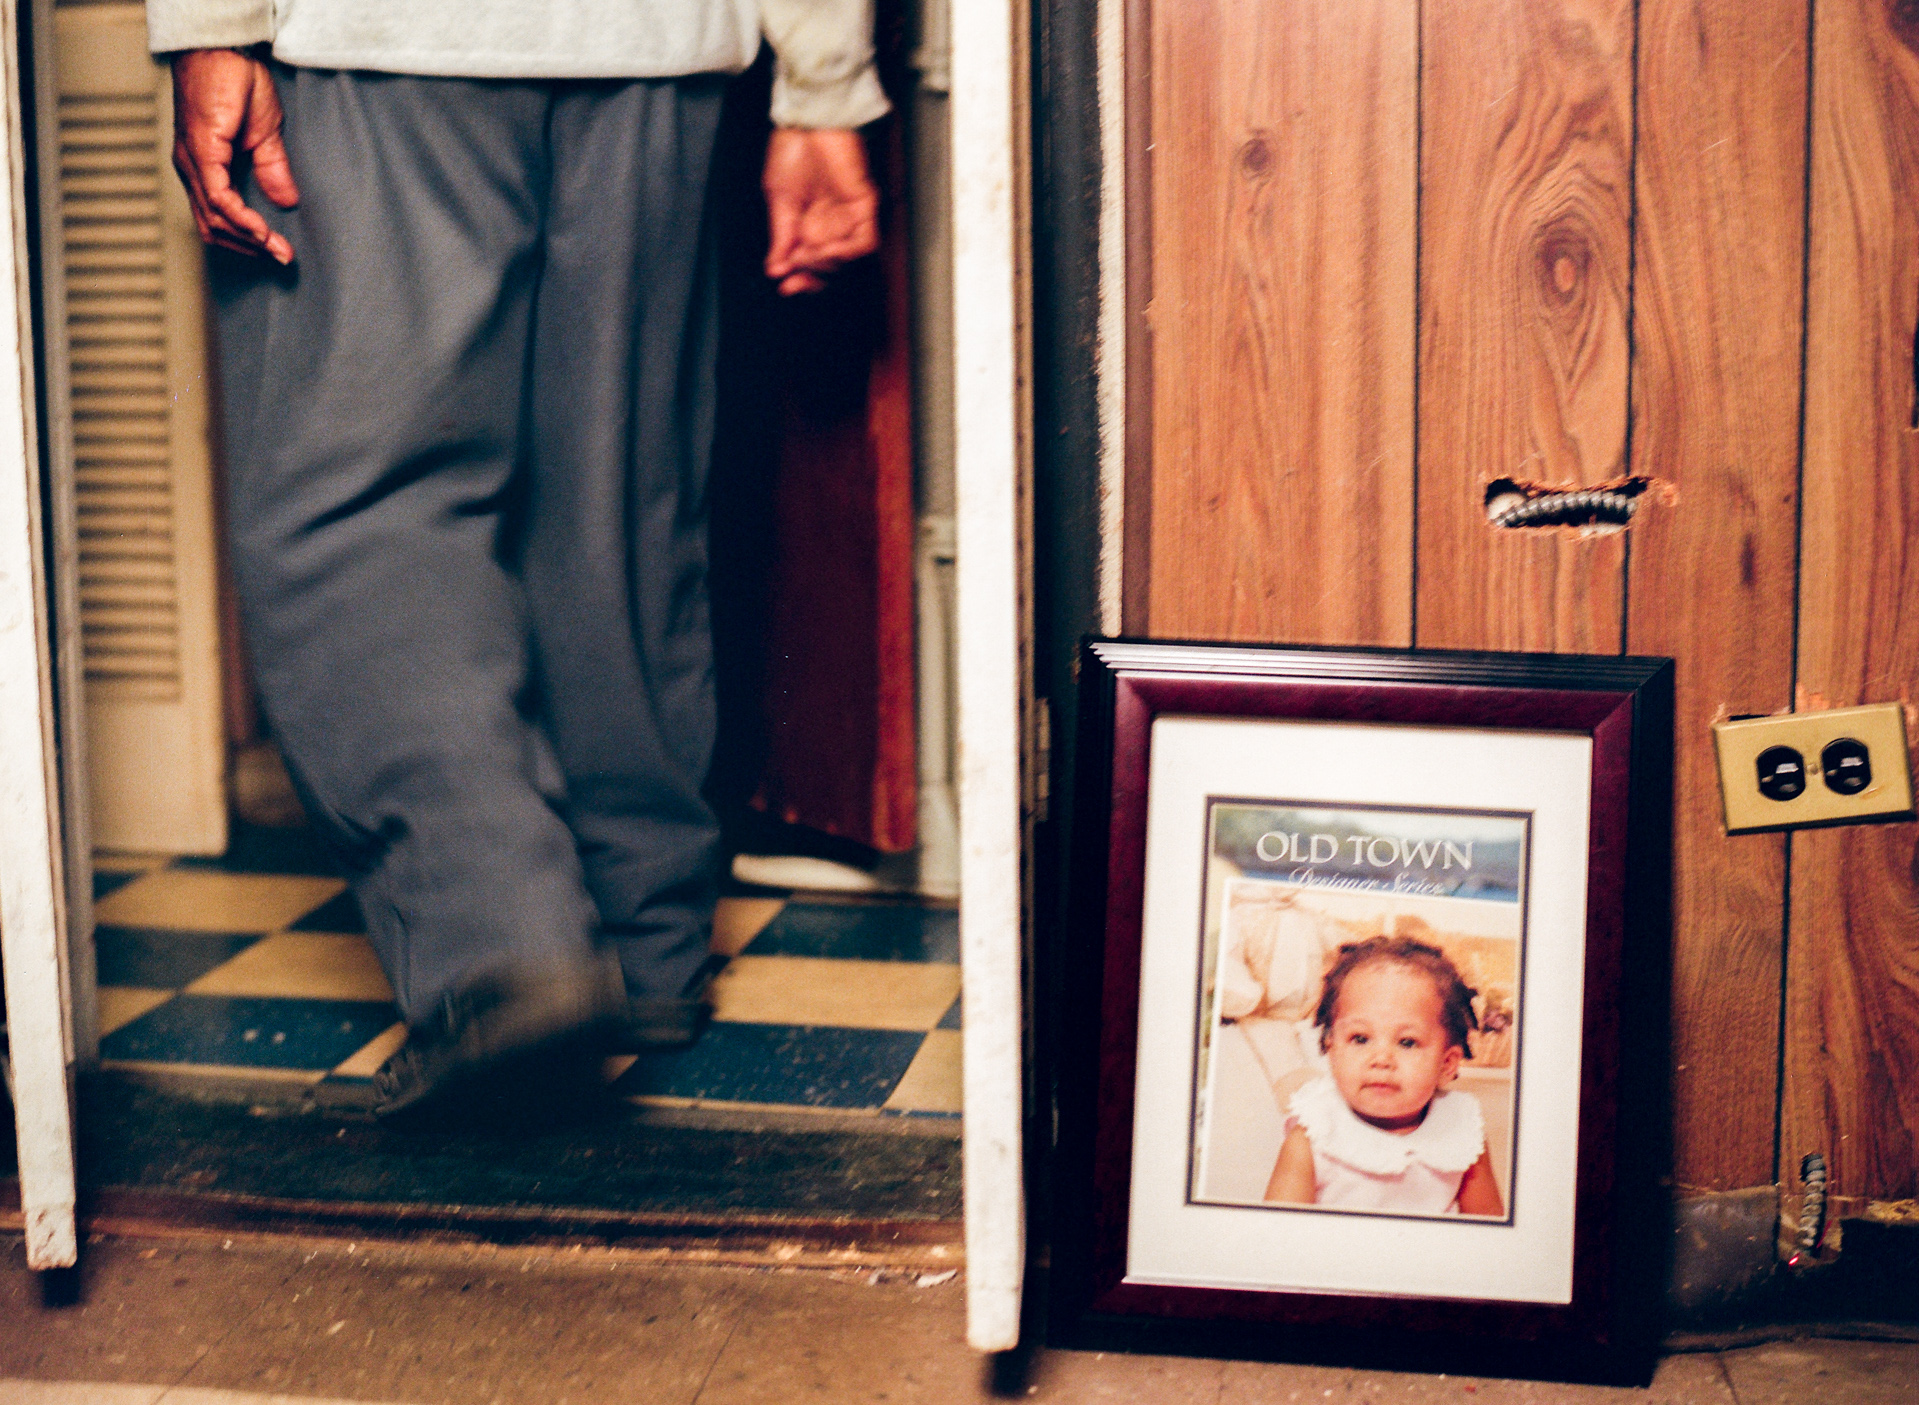 Man's legs in a doorway next to a framed photo of a child